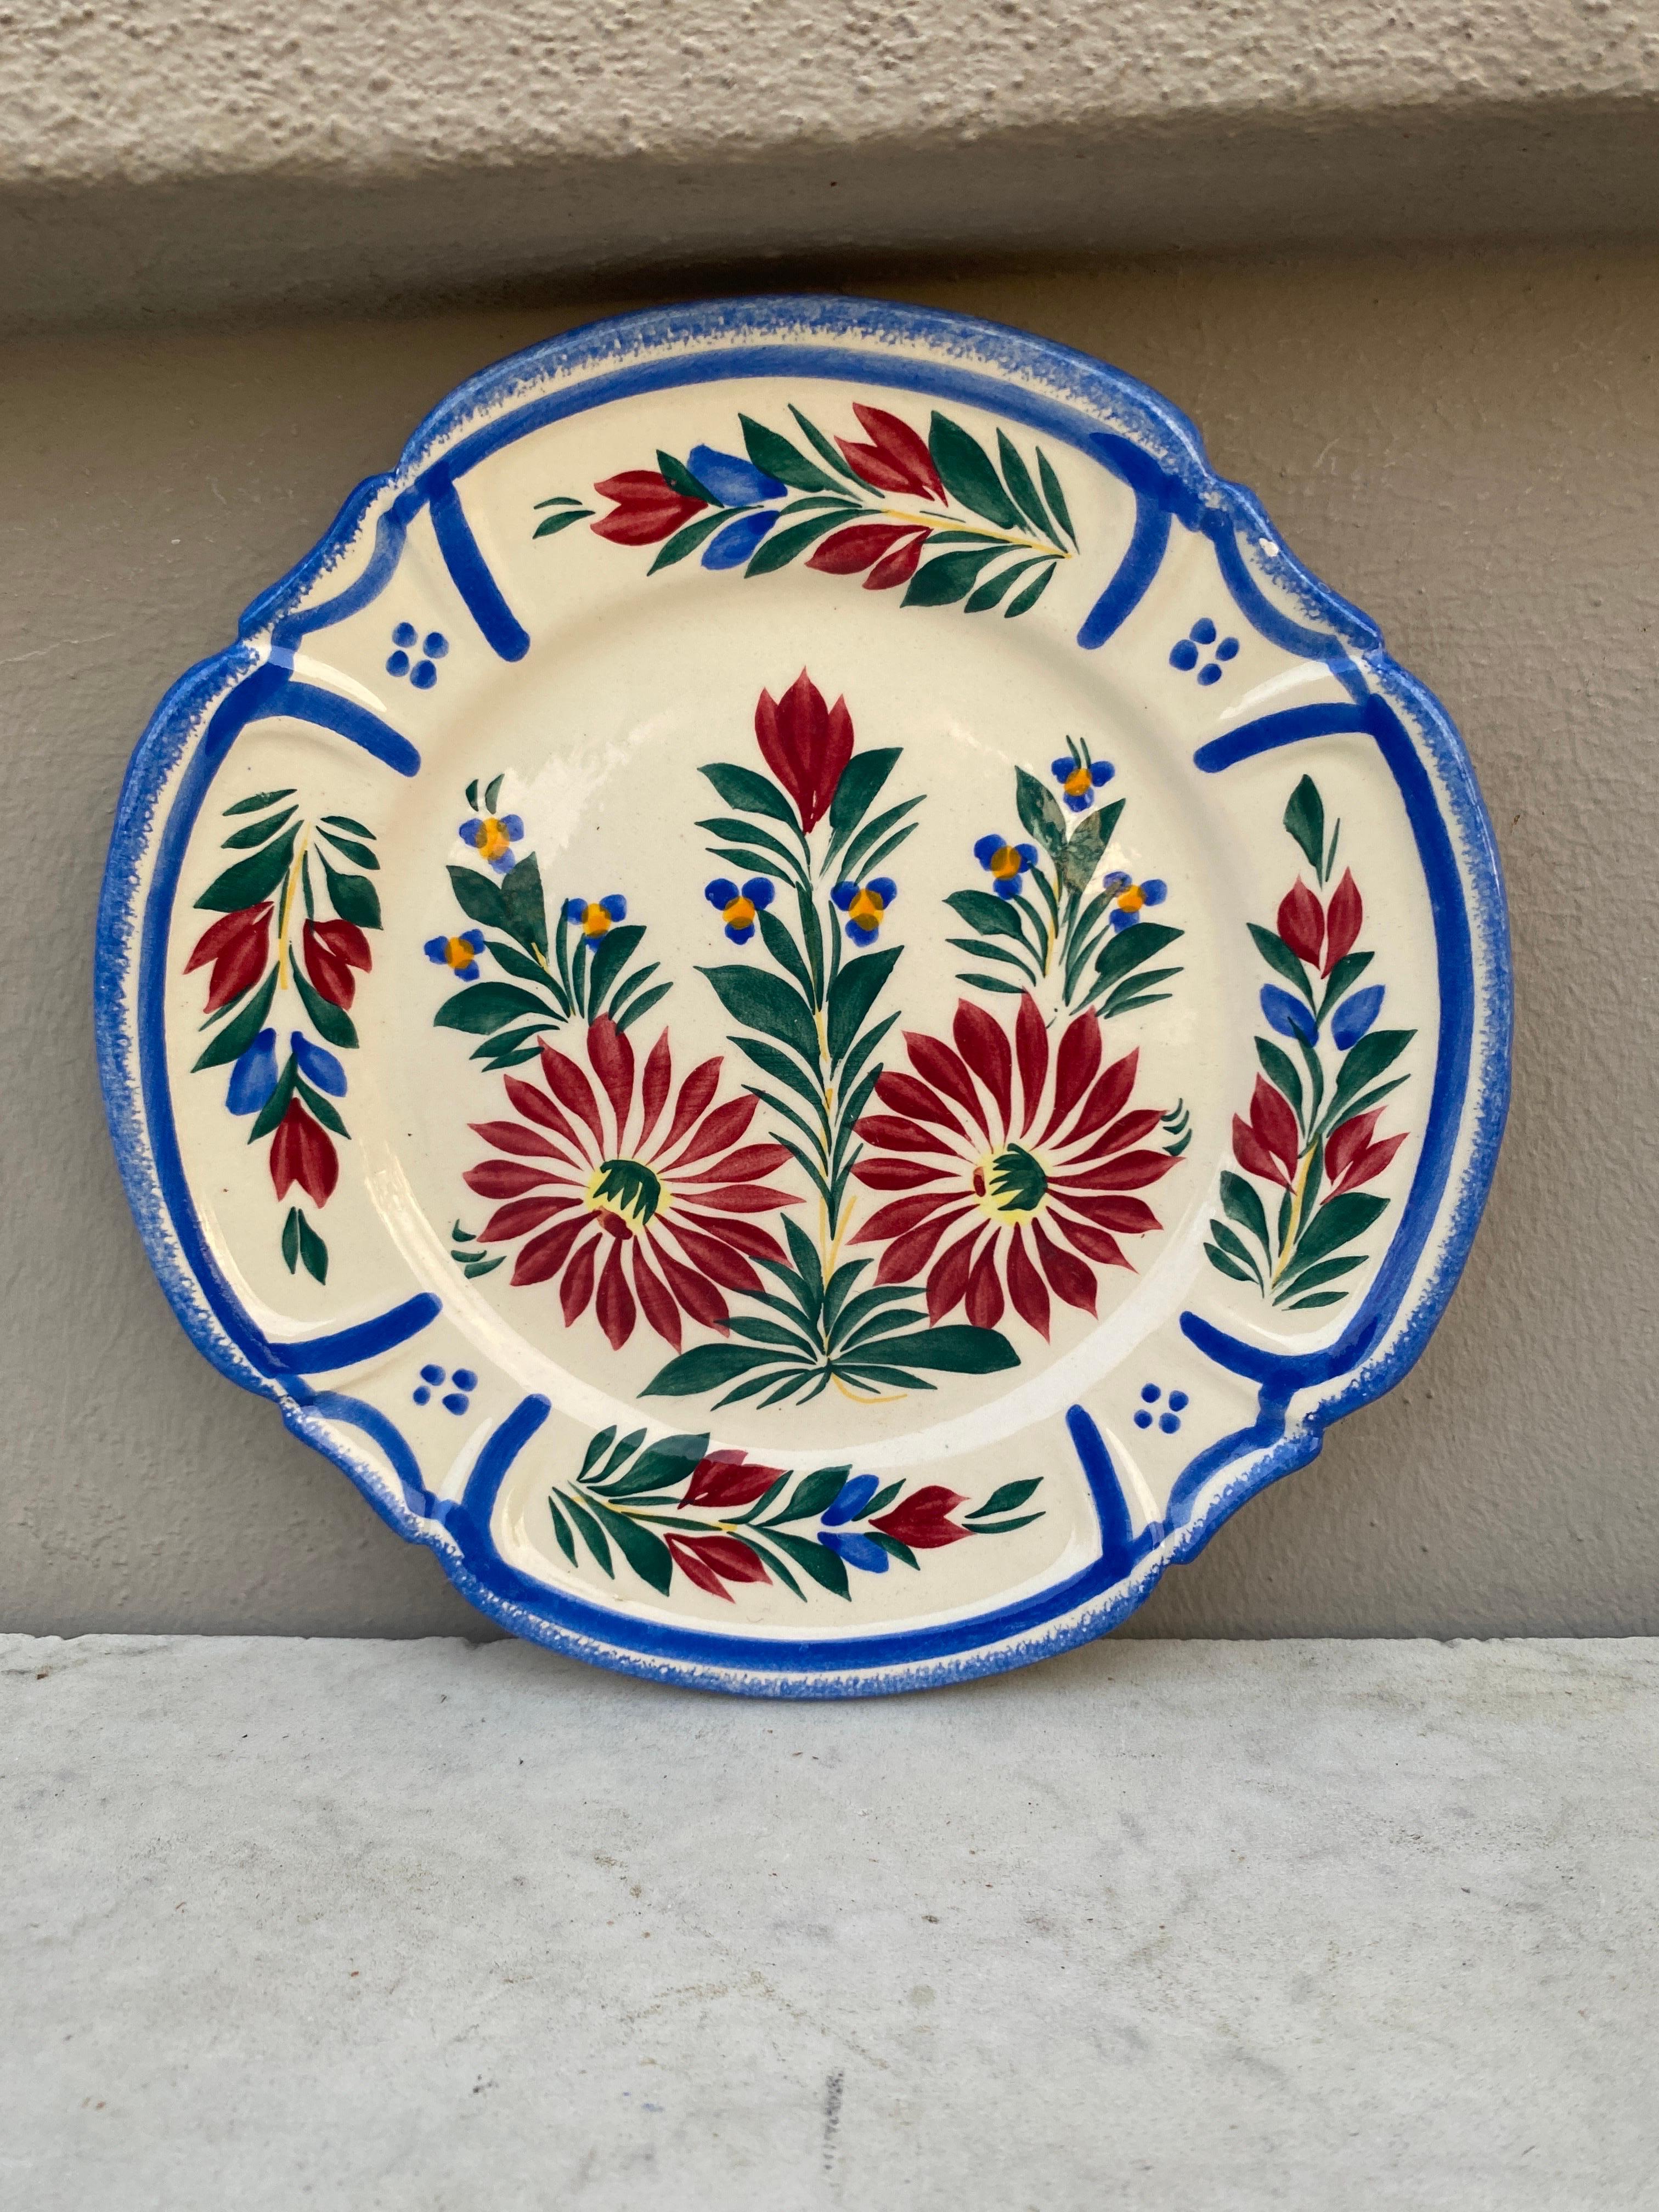 A set of 6 French faience dessert plates with a floral pattern signed HB Quimper circa 1930.